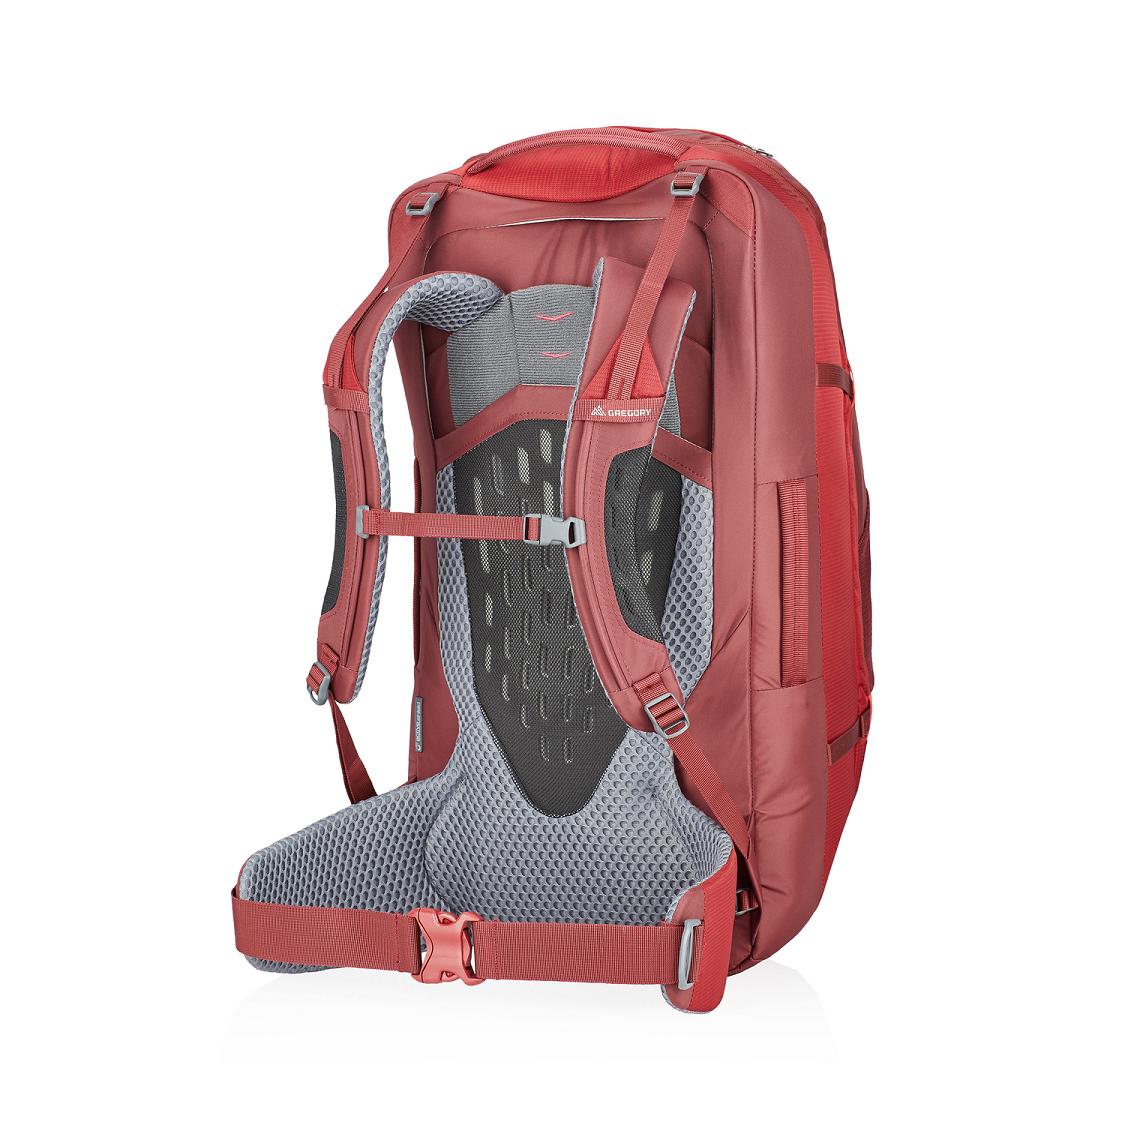 Men Gregory Tribute 70 Travel Backpack Red Usa Sale IPUO75412